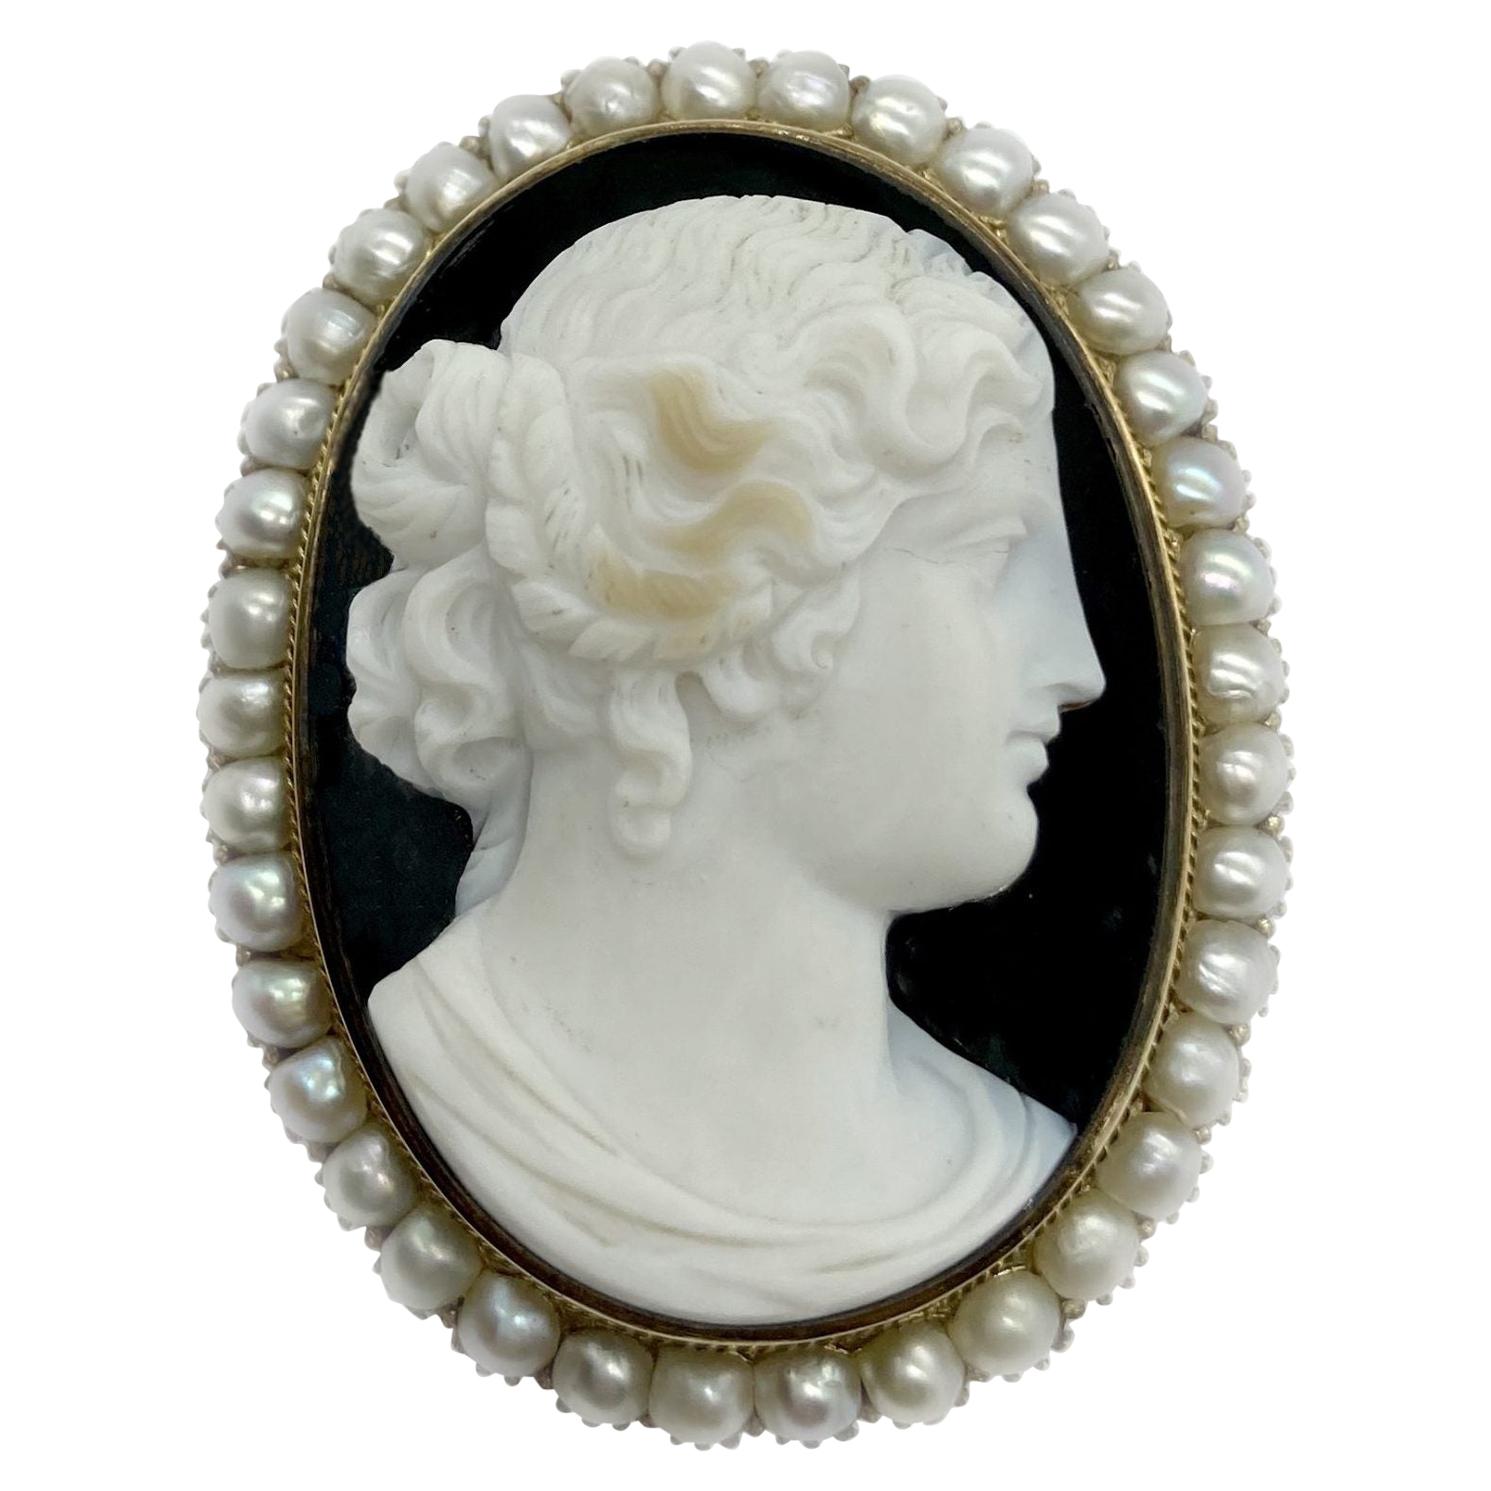 Antique Agate Cameo and Pearl Brooch